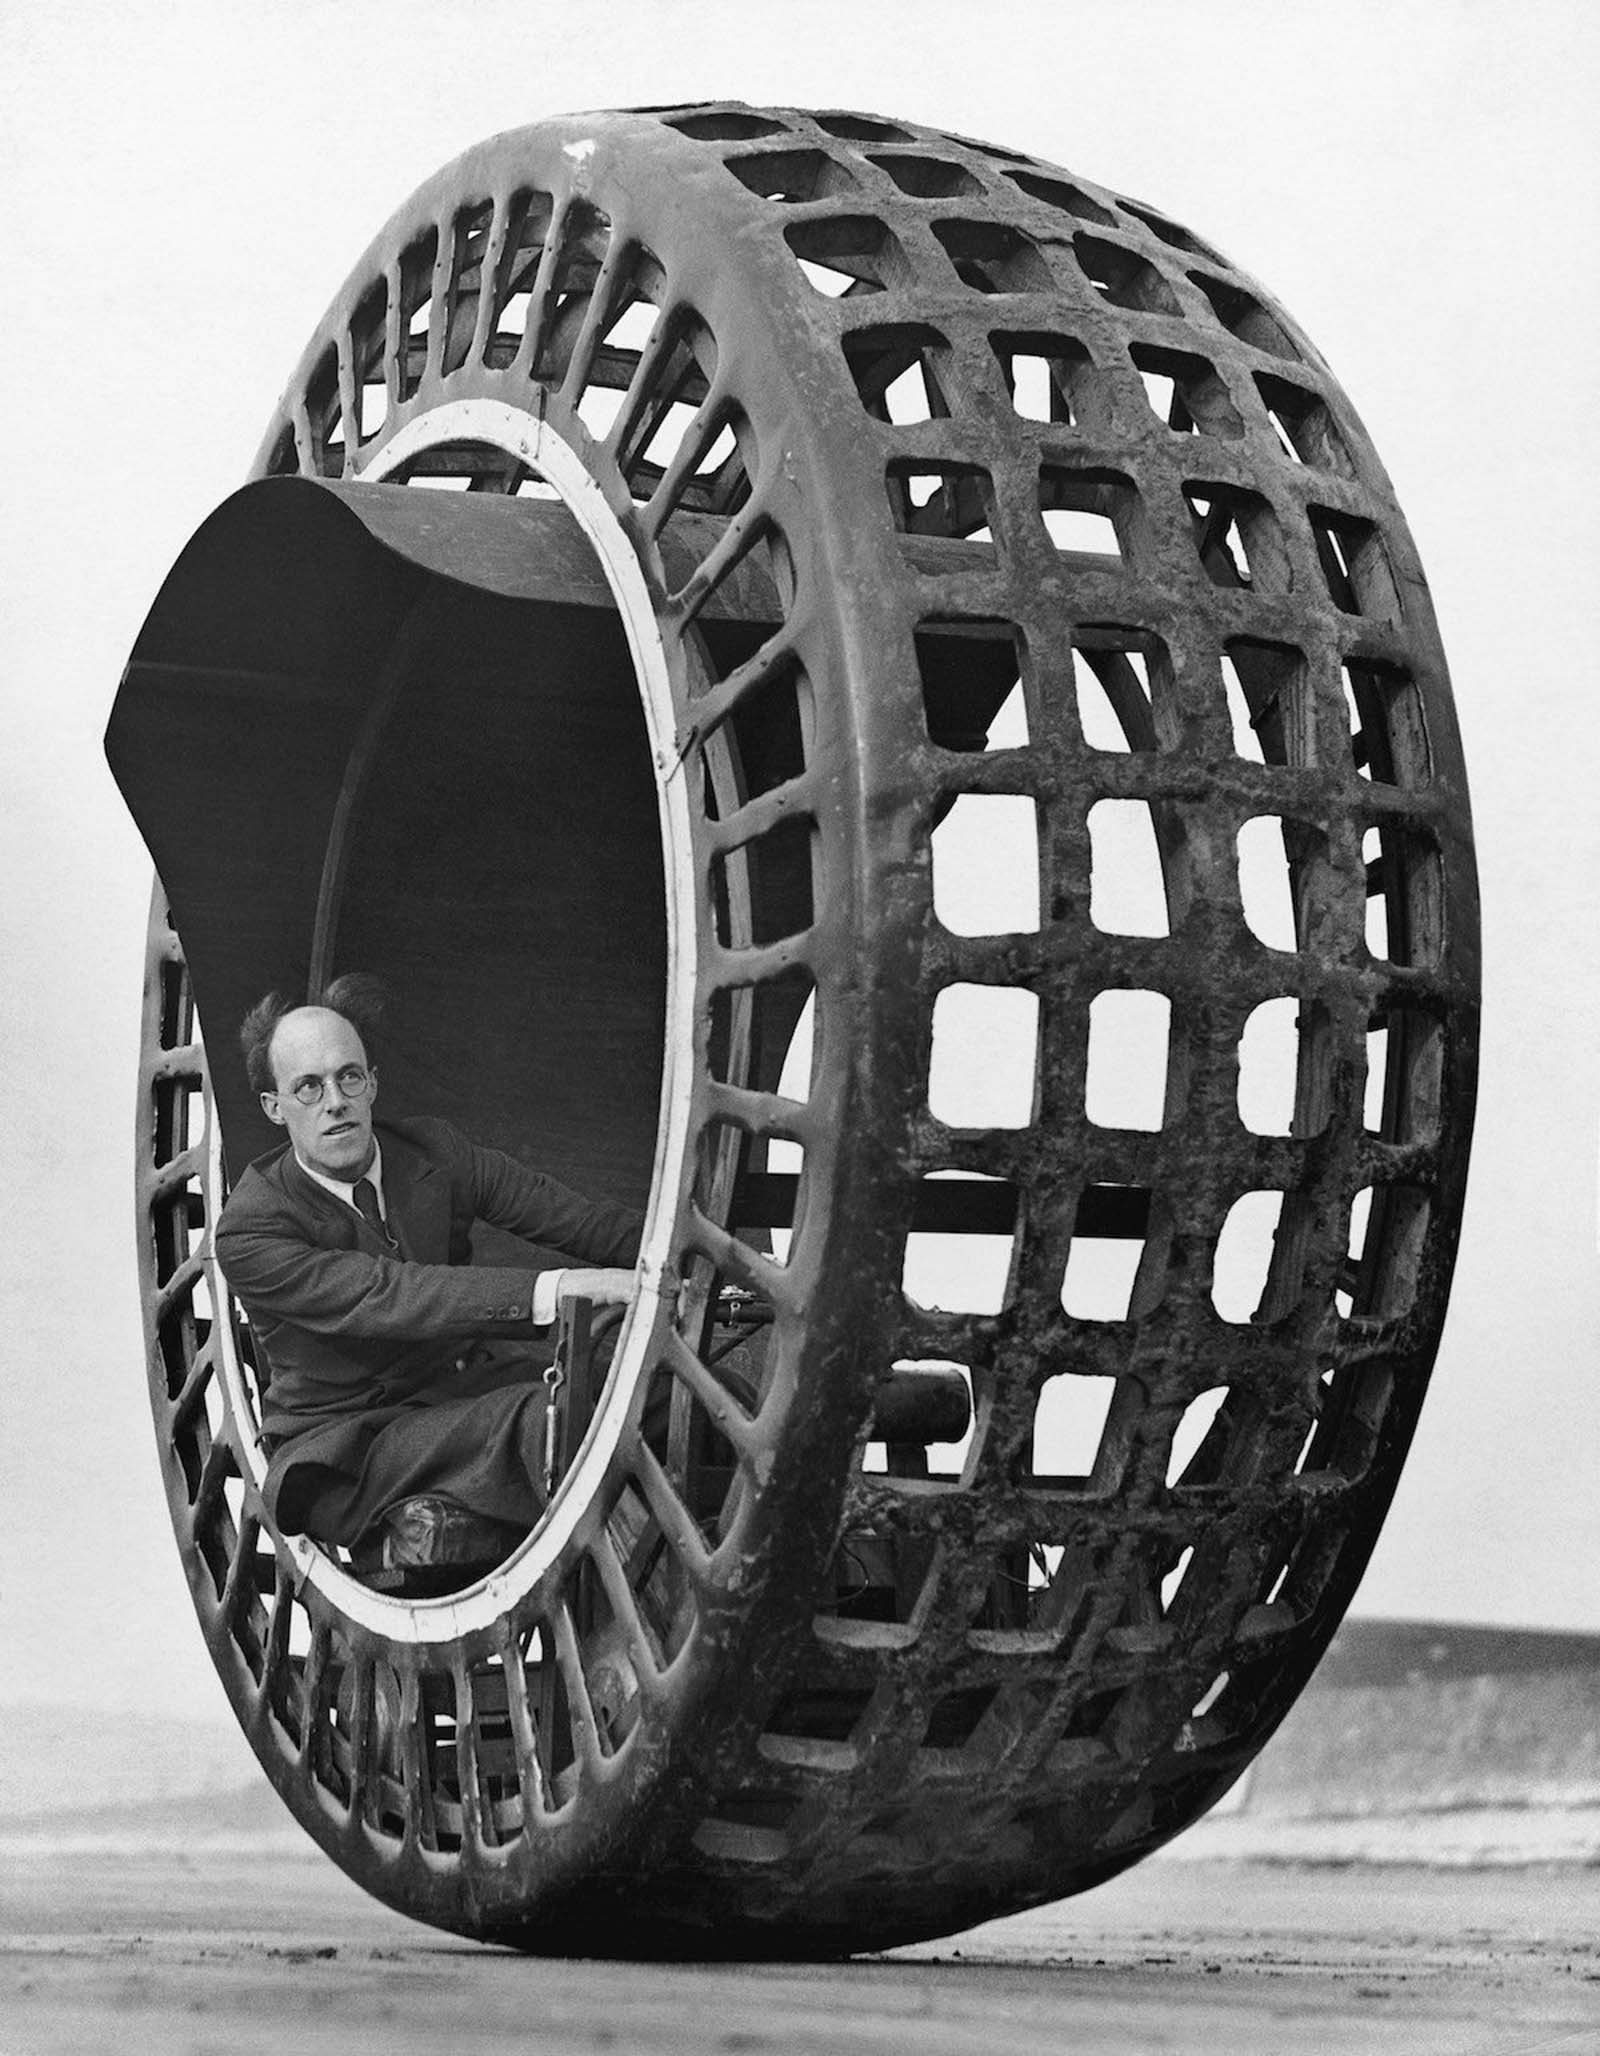 J. A. Purves drives a Dynasphere spherical car, an automobile shaped like a giant radial tire. Mr. Purves was the vehicle’s inventor, 1932.